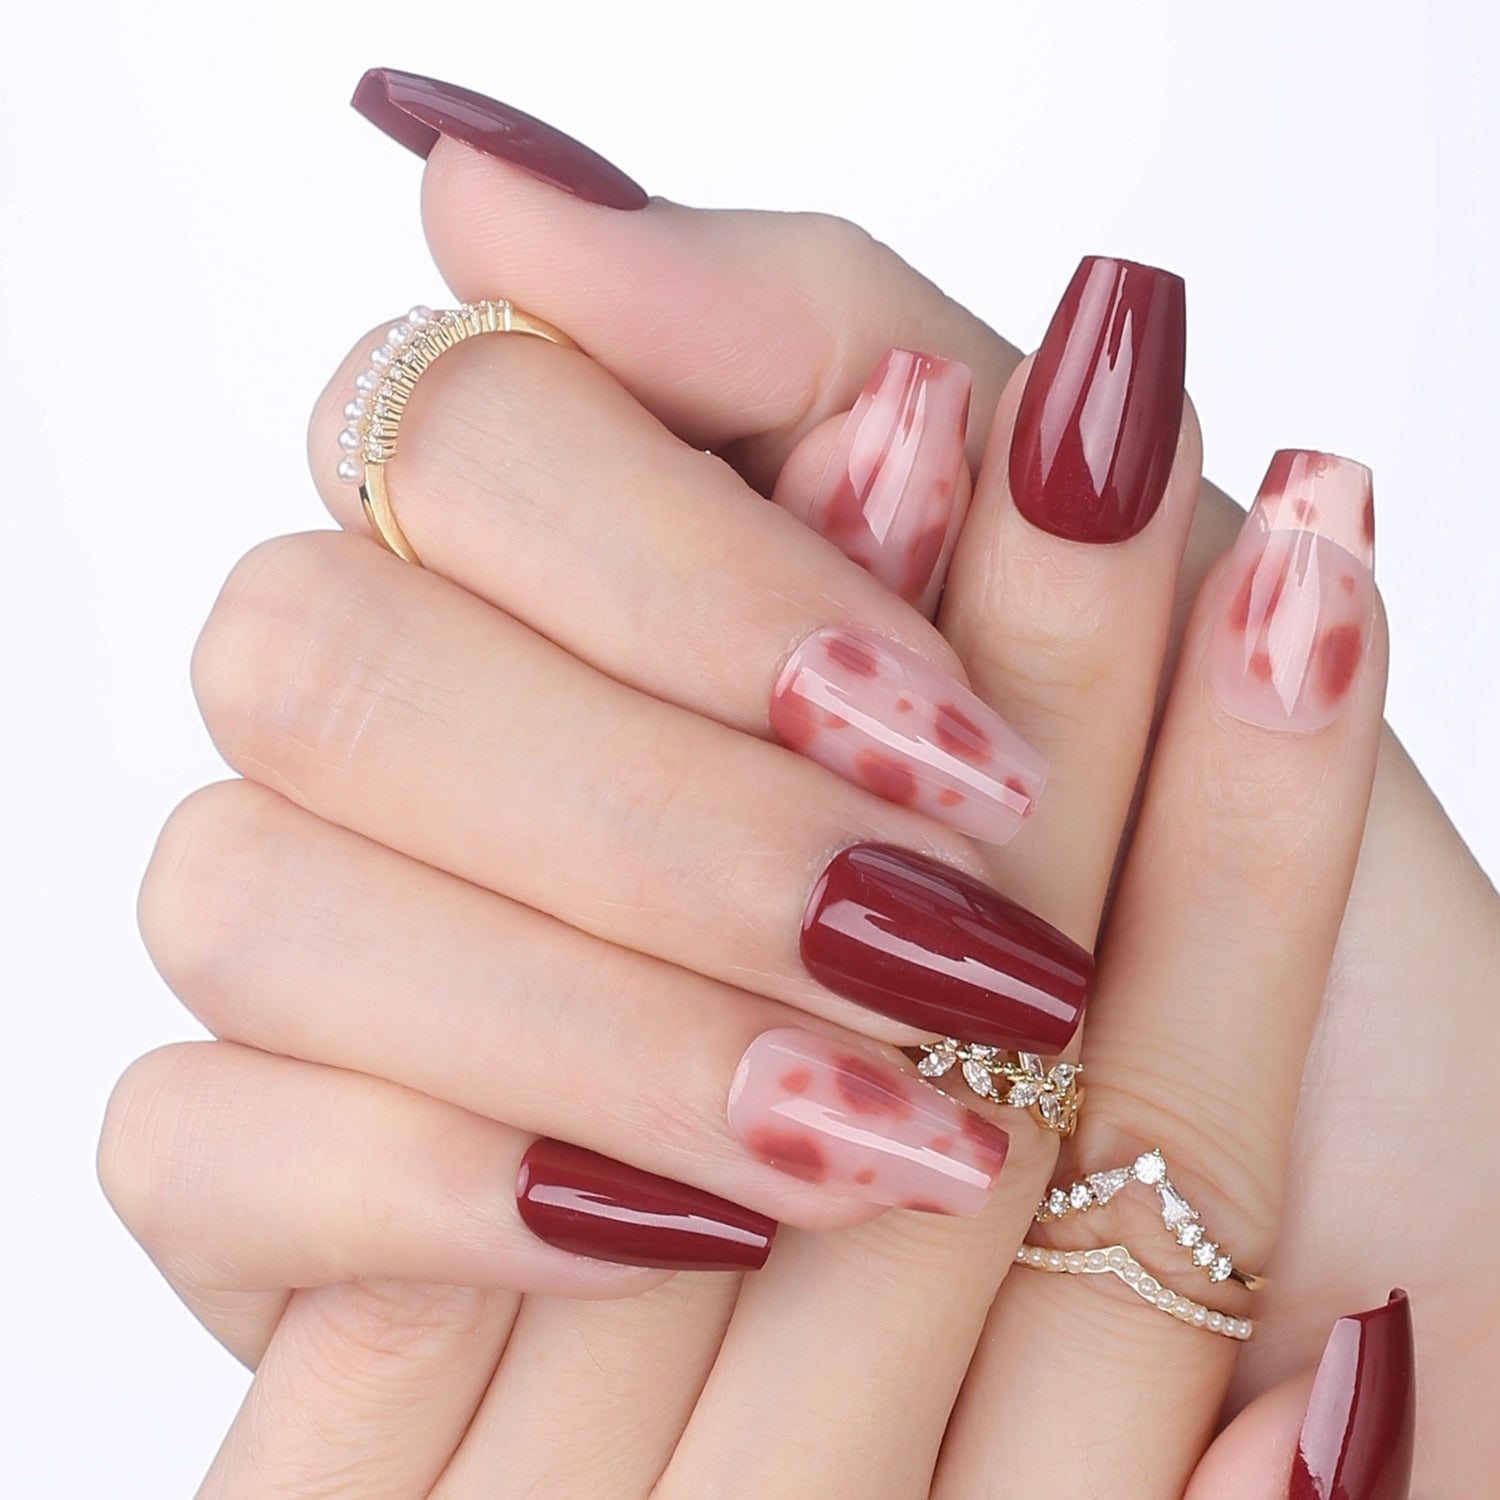 Faux Ongles Rouge Ballerine Longs Press On Nails